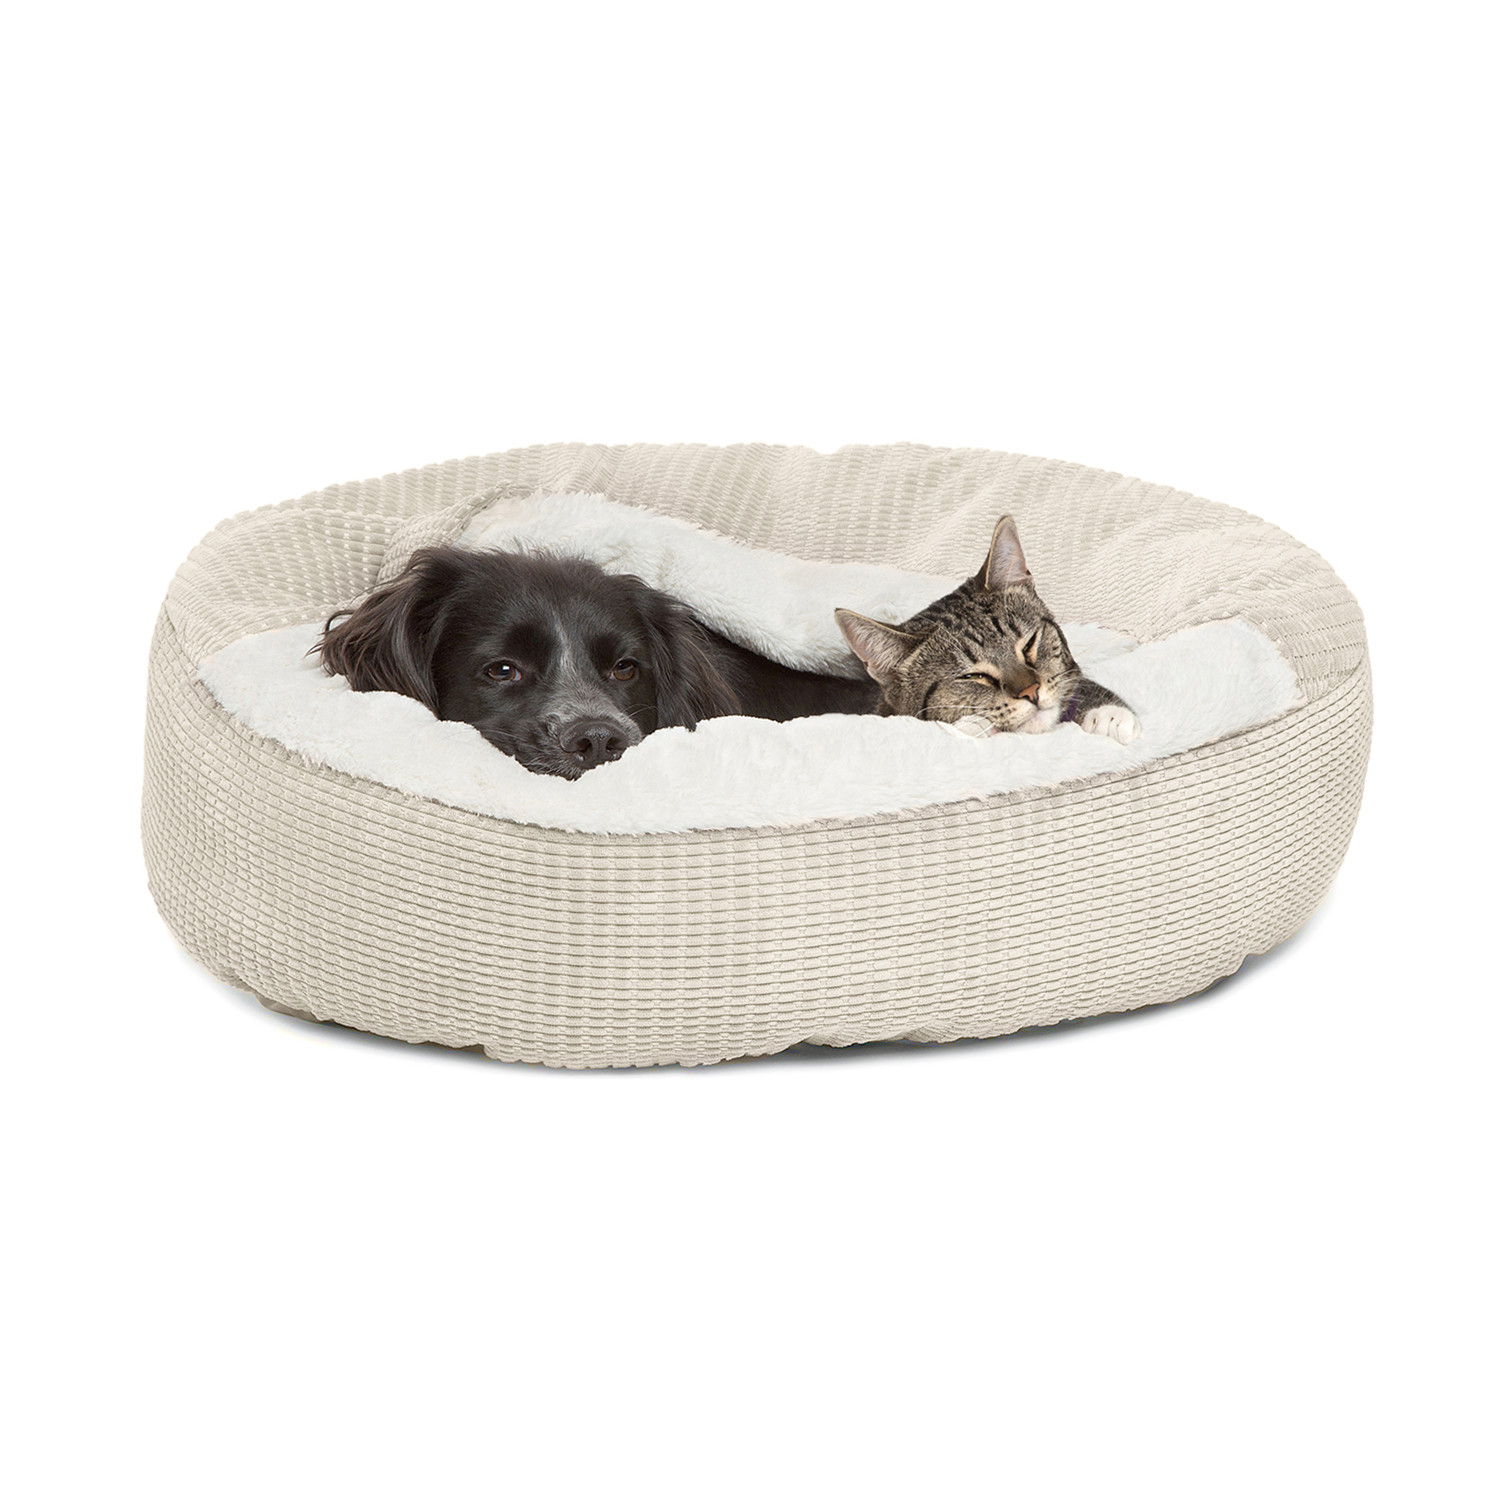 Product image for Cozy Cuddler Cat & Dog Bed, 26x26